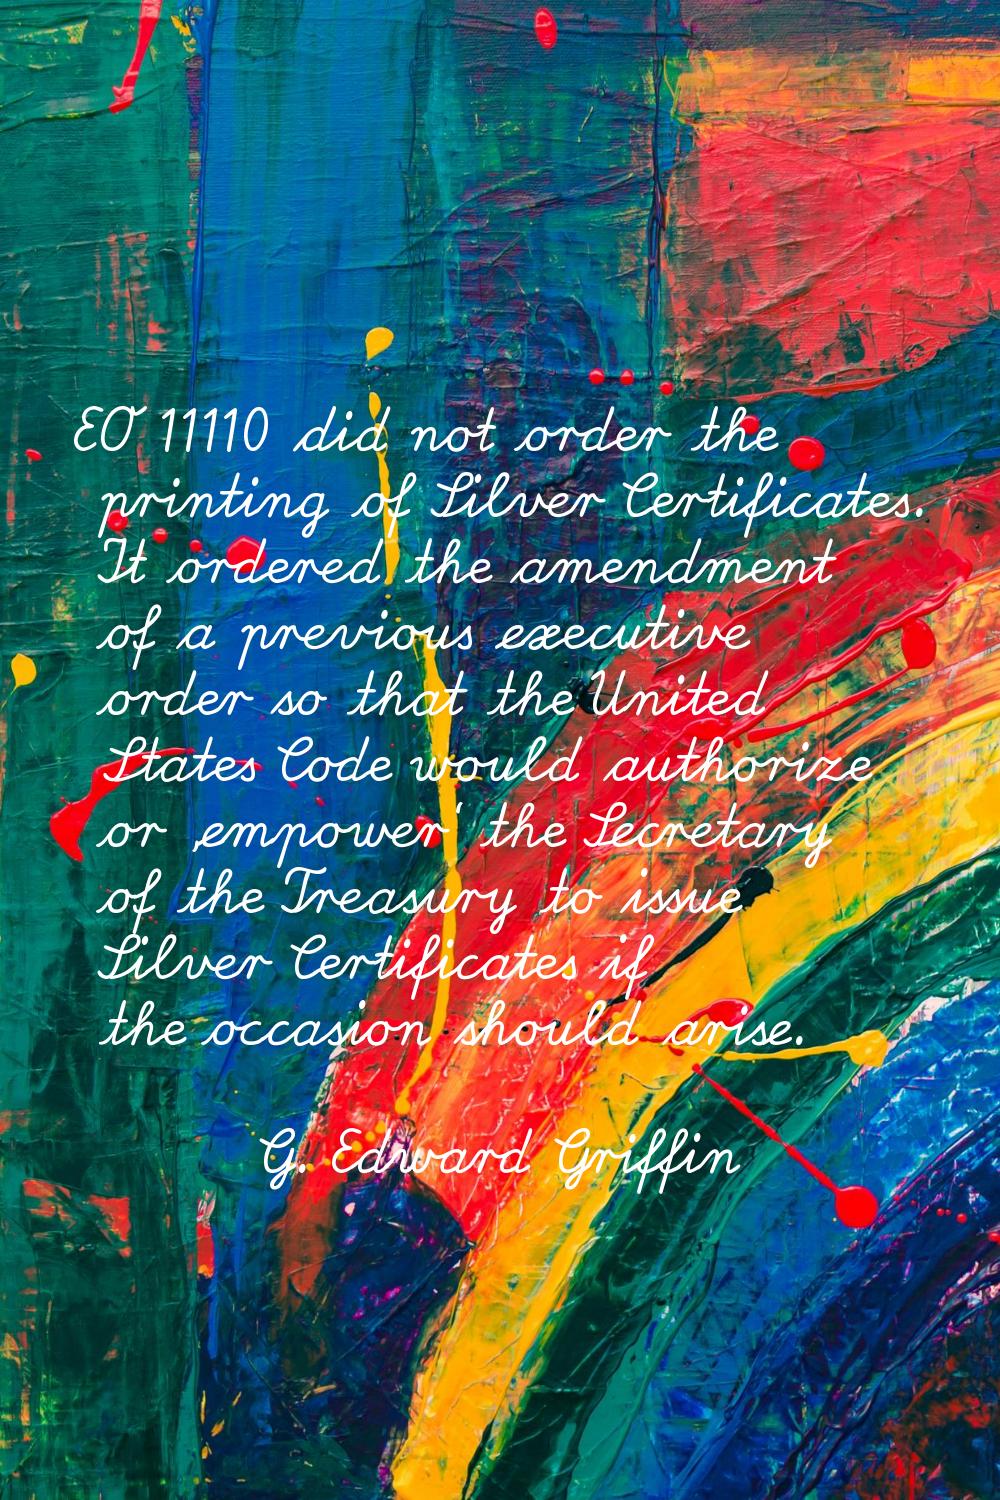 EO 11110 did not order the printing of Silver Certificates. It ordered the amendment of a previous 